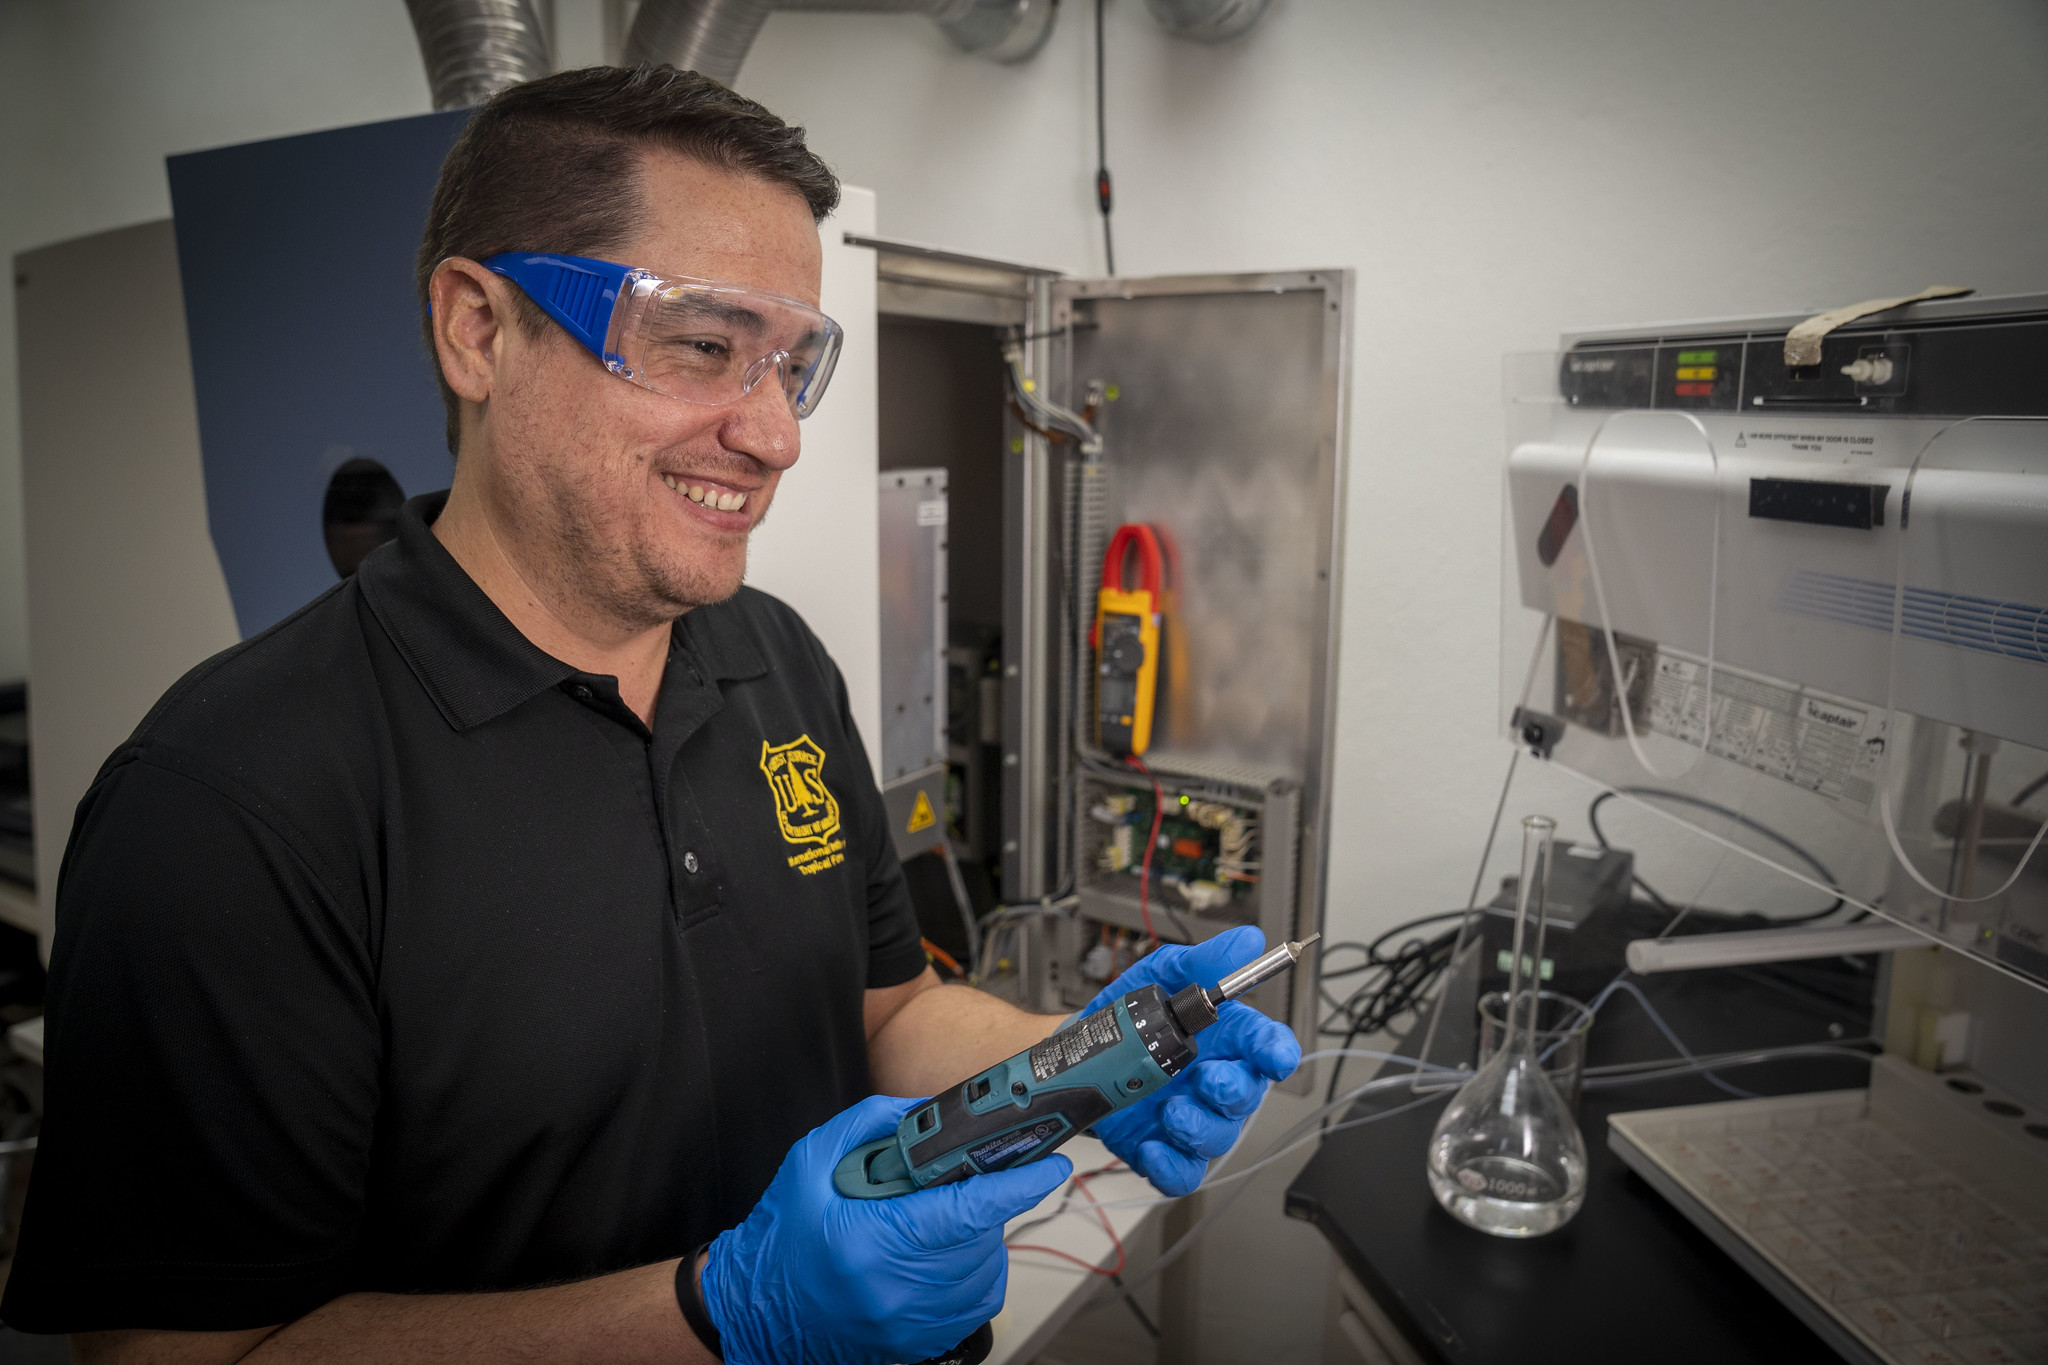 A researcher prepares to work with tools in a lab.